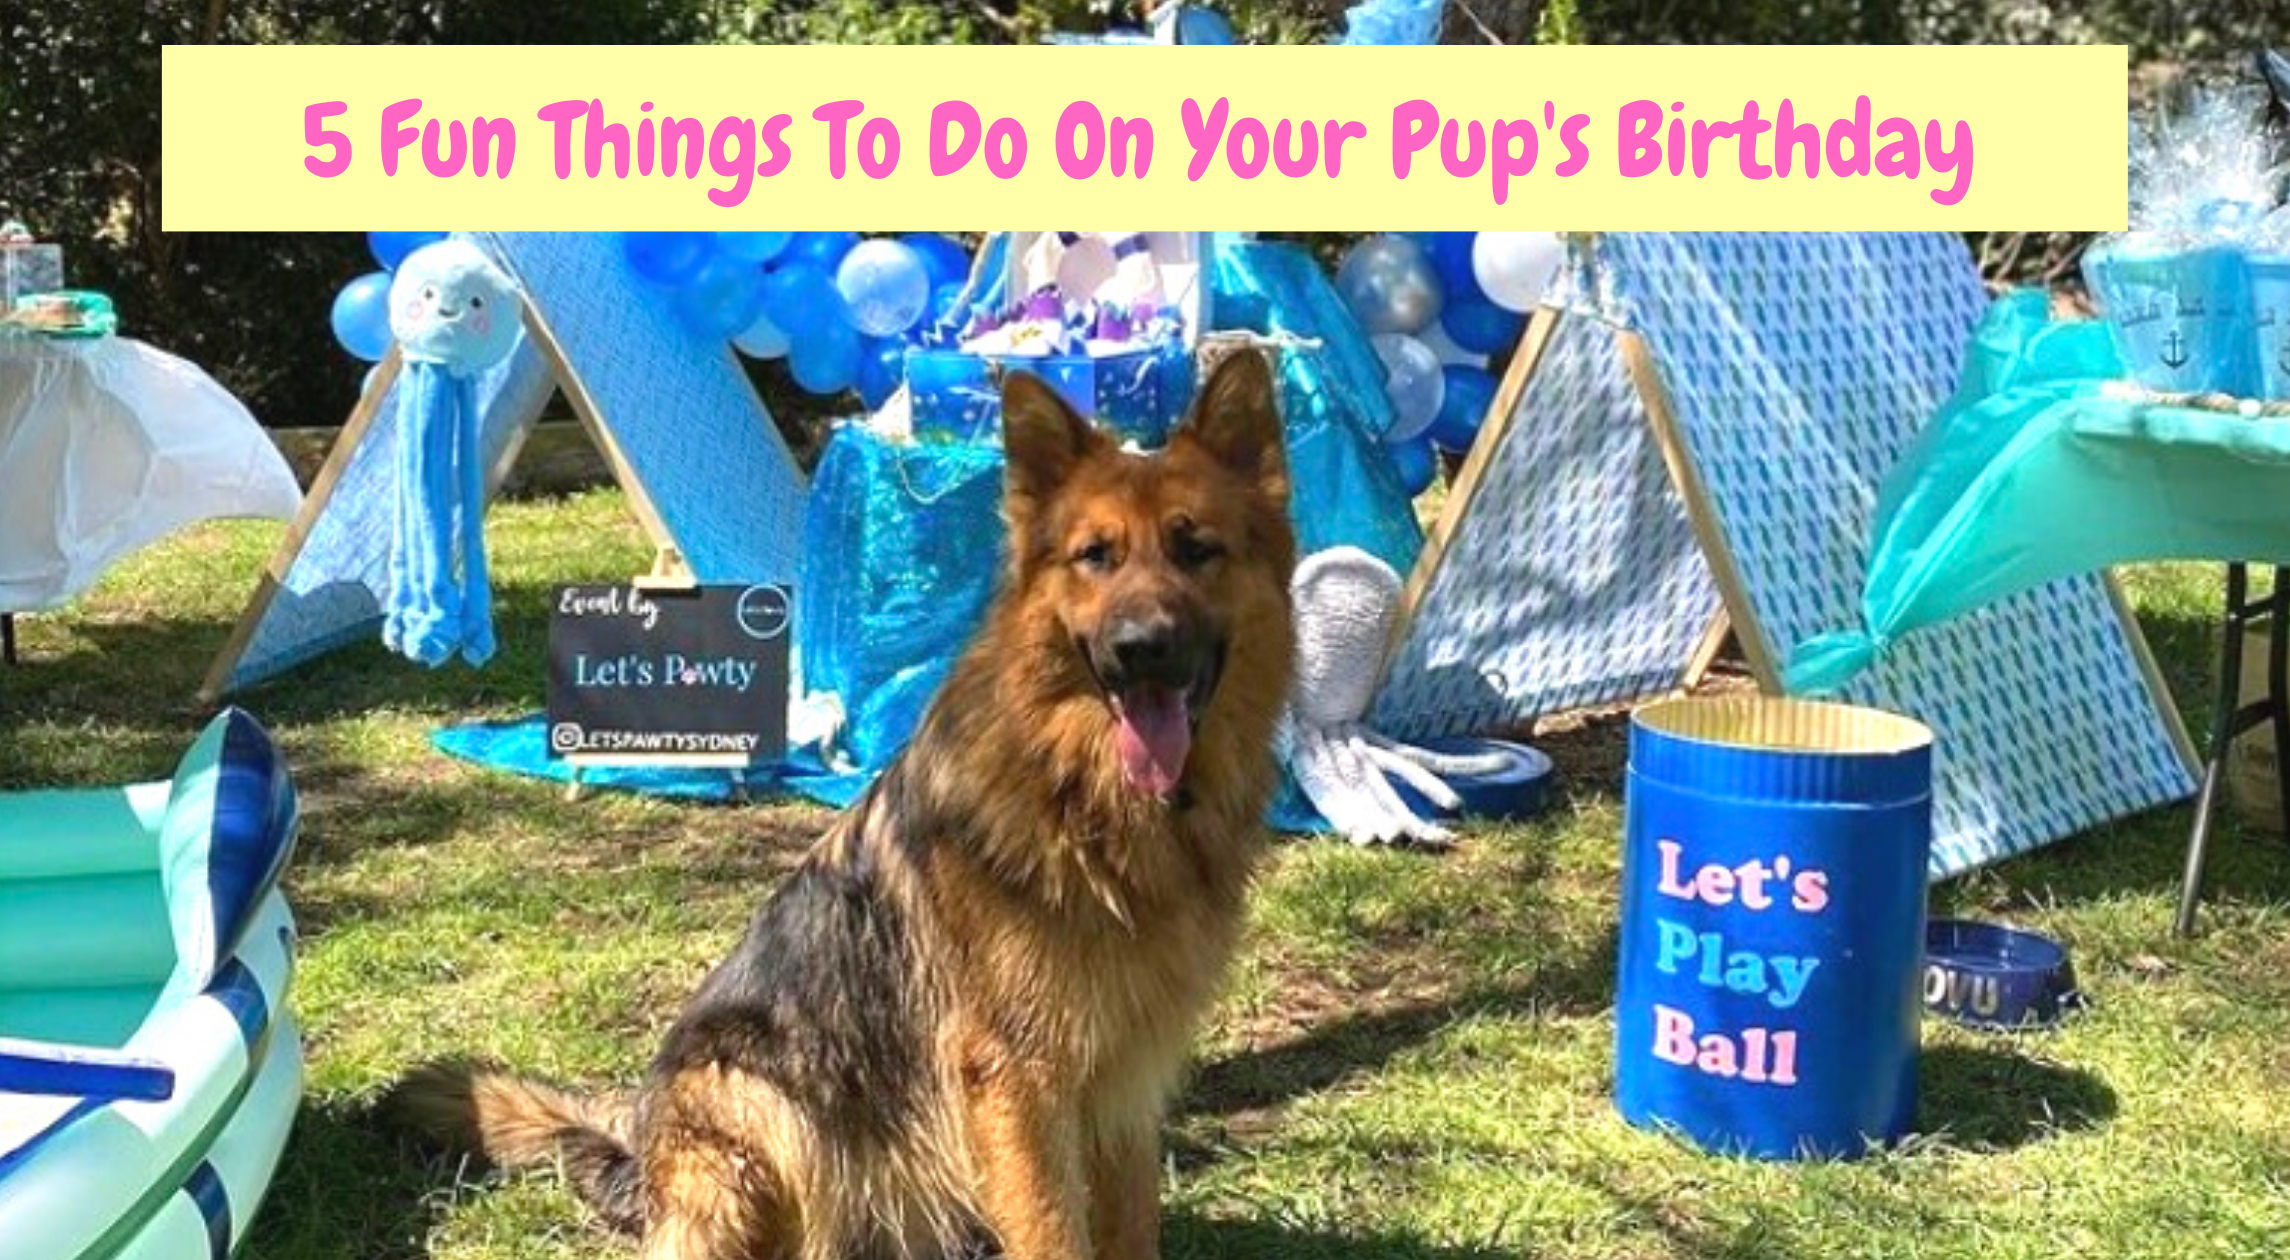 5 fun things to do on your pup's birthday